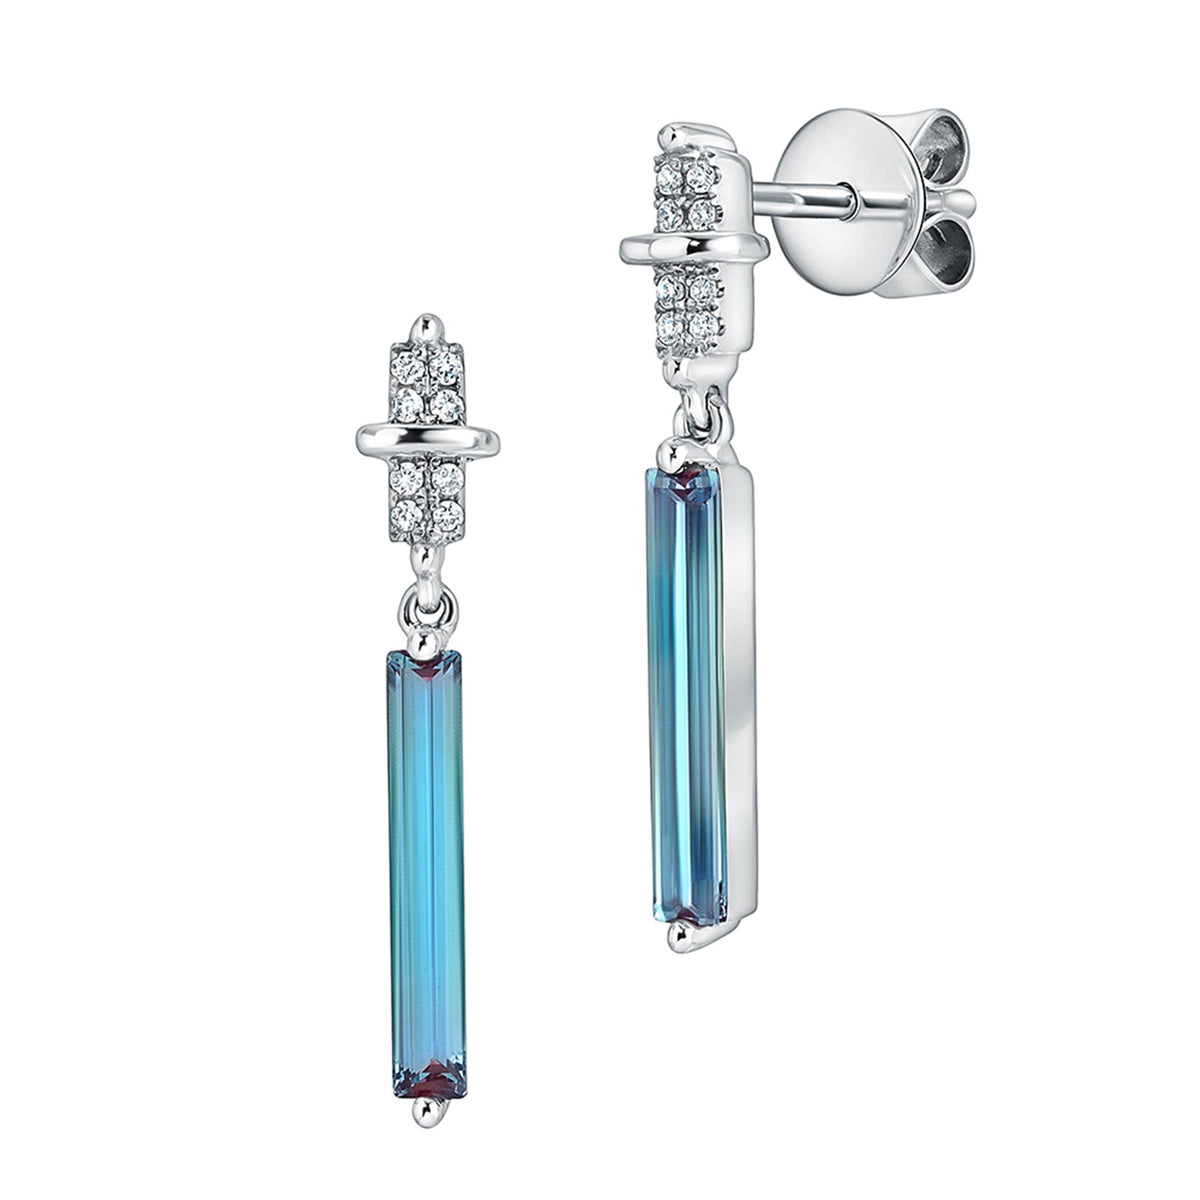 14Kt White Gold Dangle Earrings With 1.16ct Chatham Lab Created Alexandrite